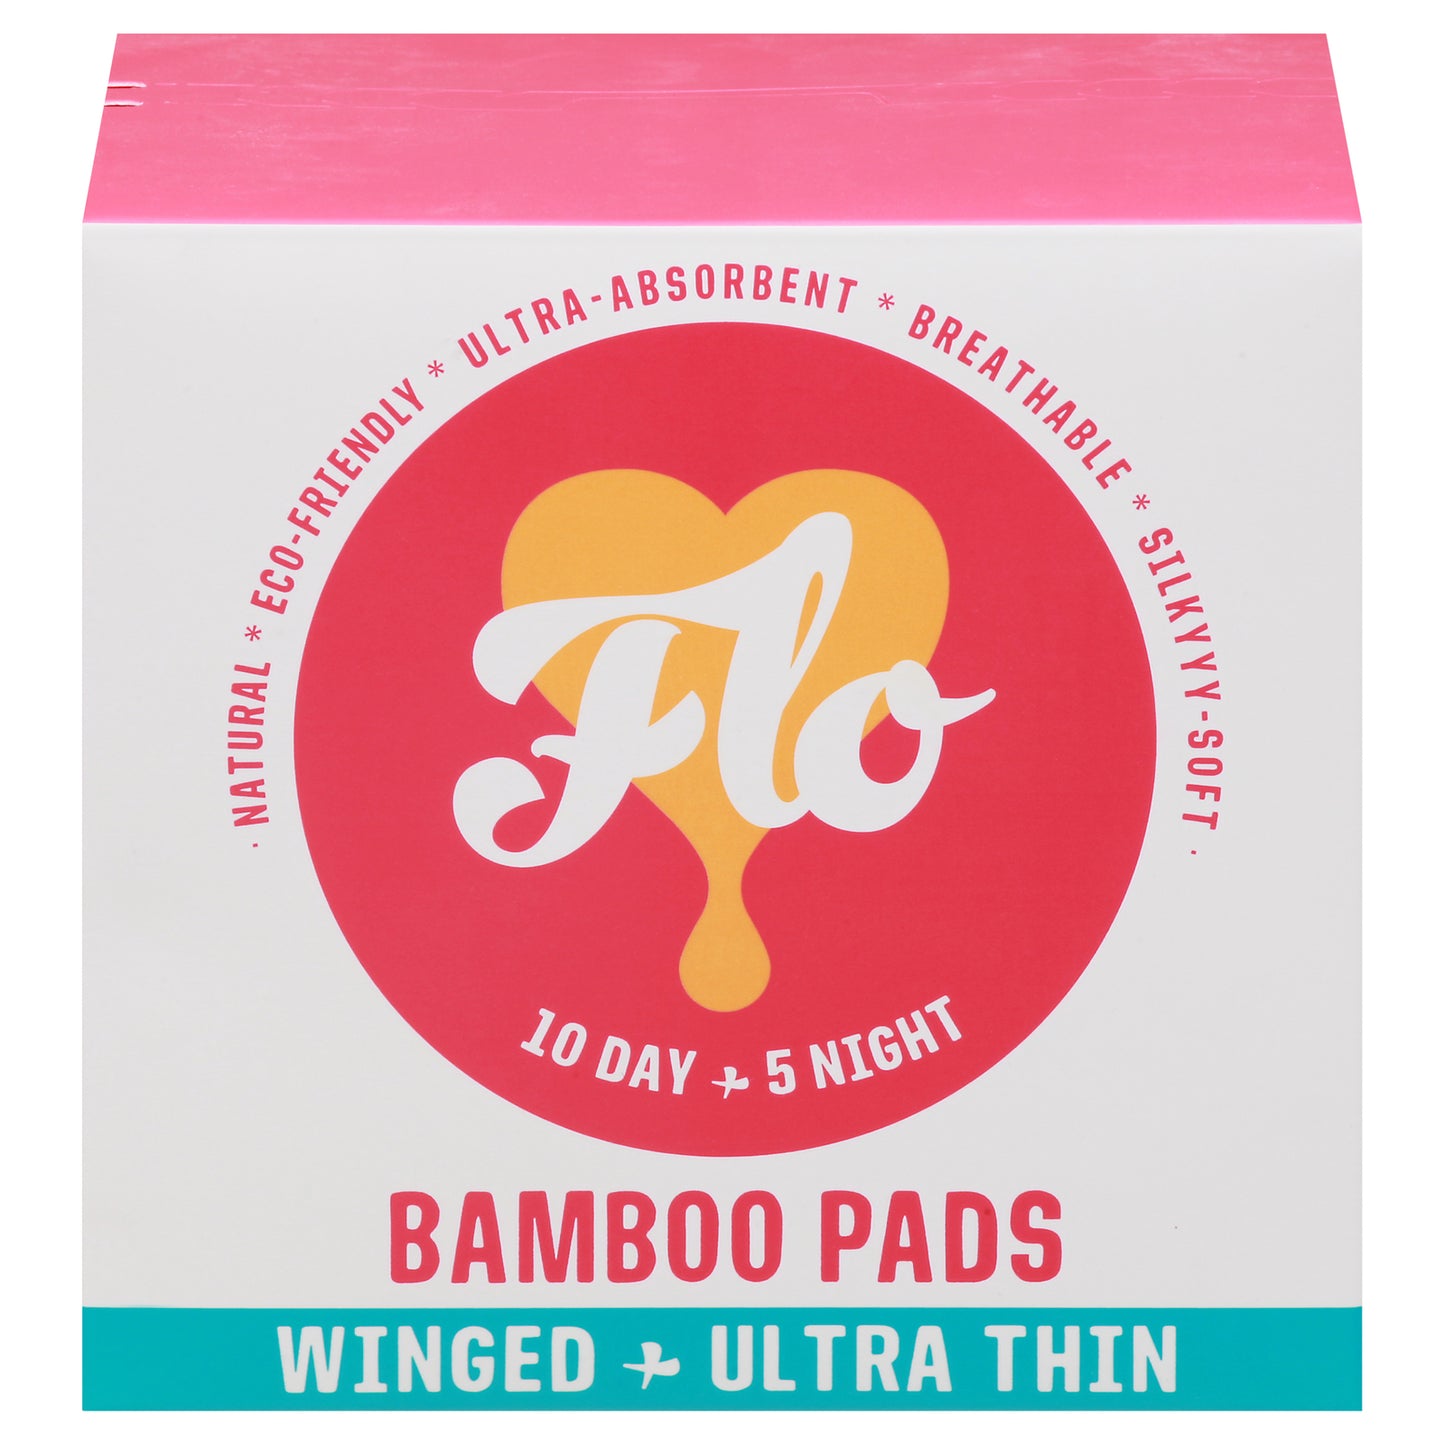 Flo Ultra-thin Winged Bamboo Pads, 120 ct.